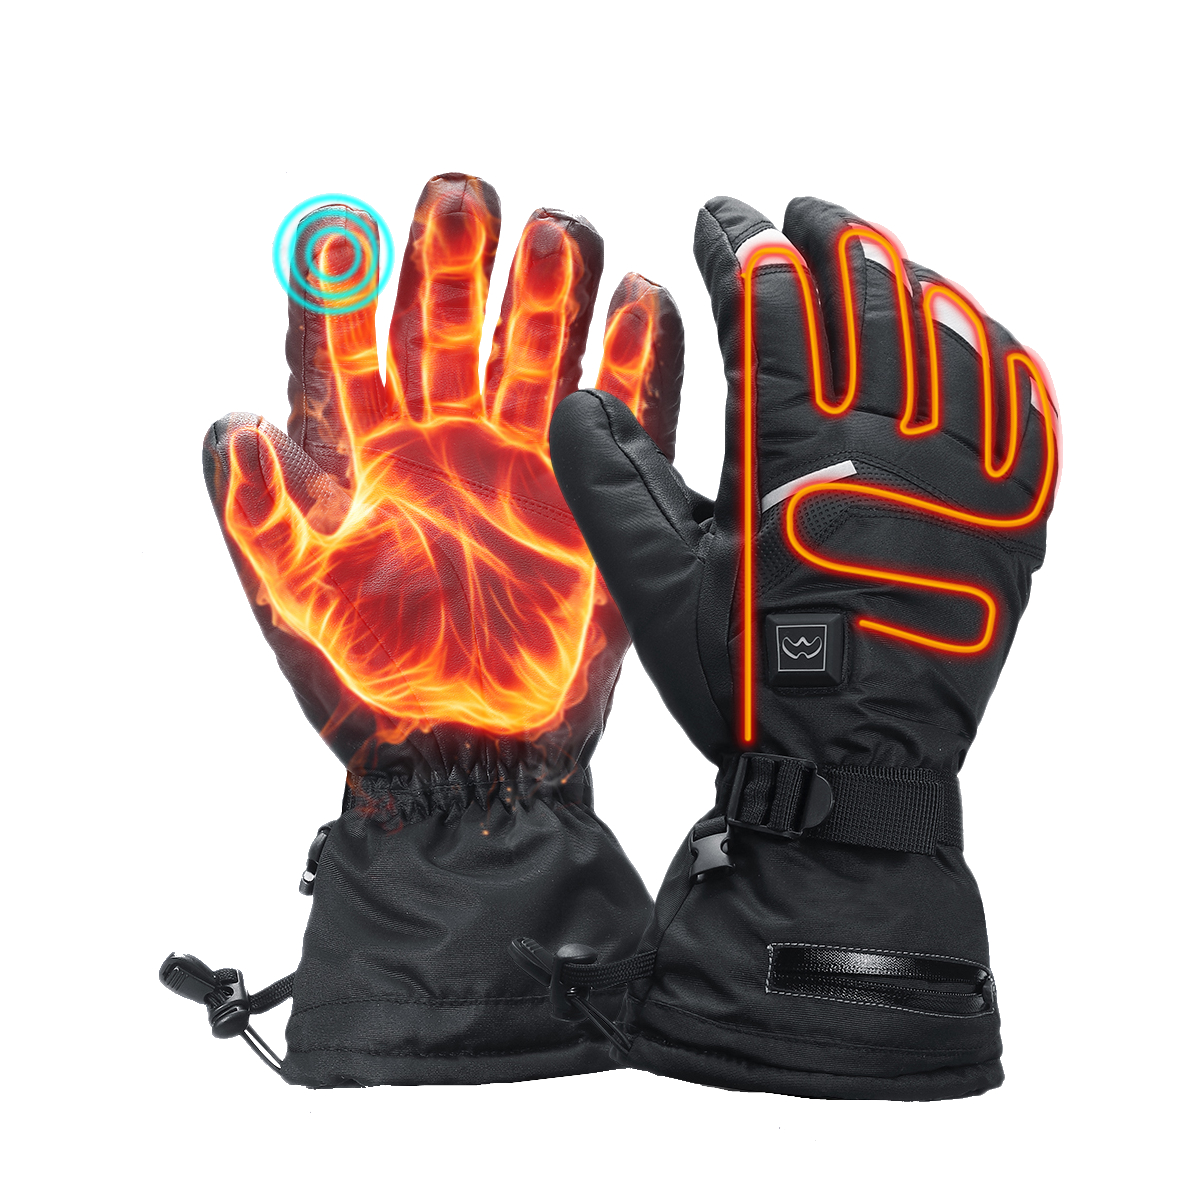 Men Electric Heated Gloves Windproof Winter Warm 3.7V Rechargeable Battery for